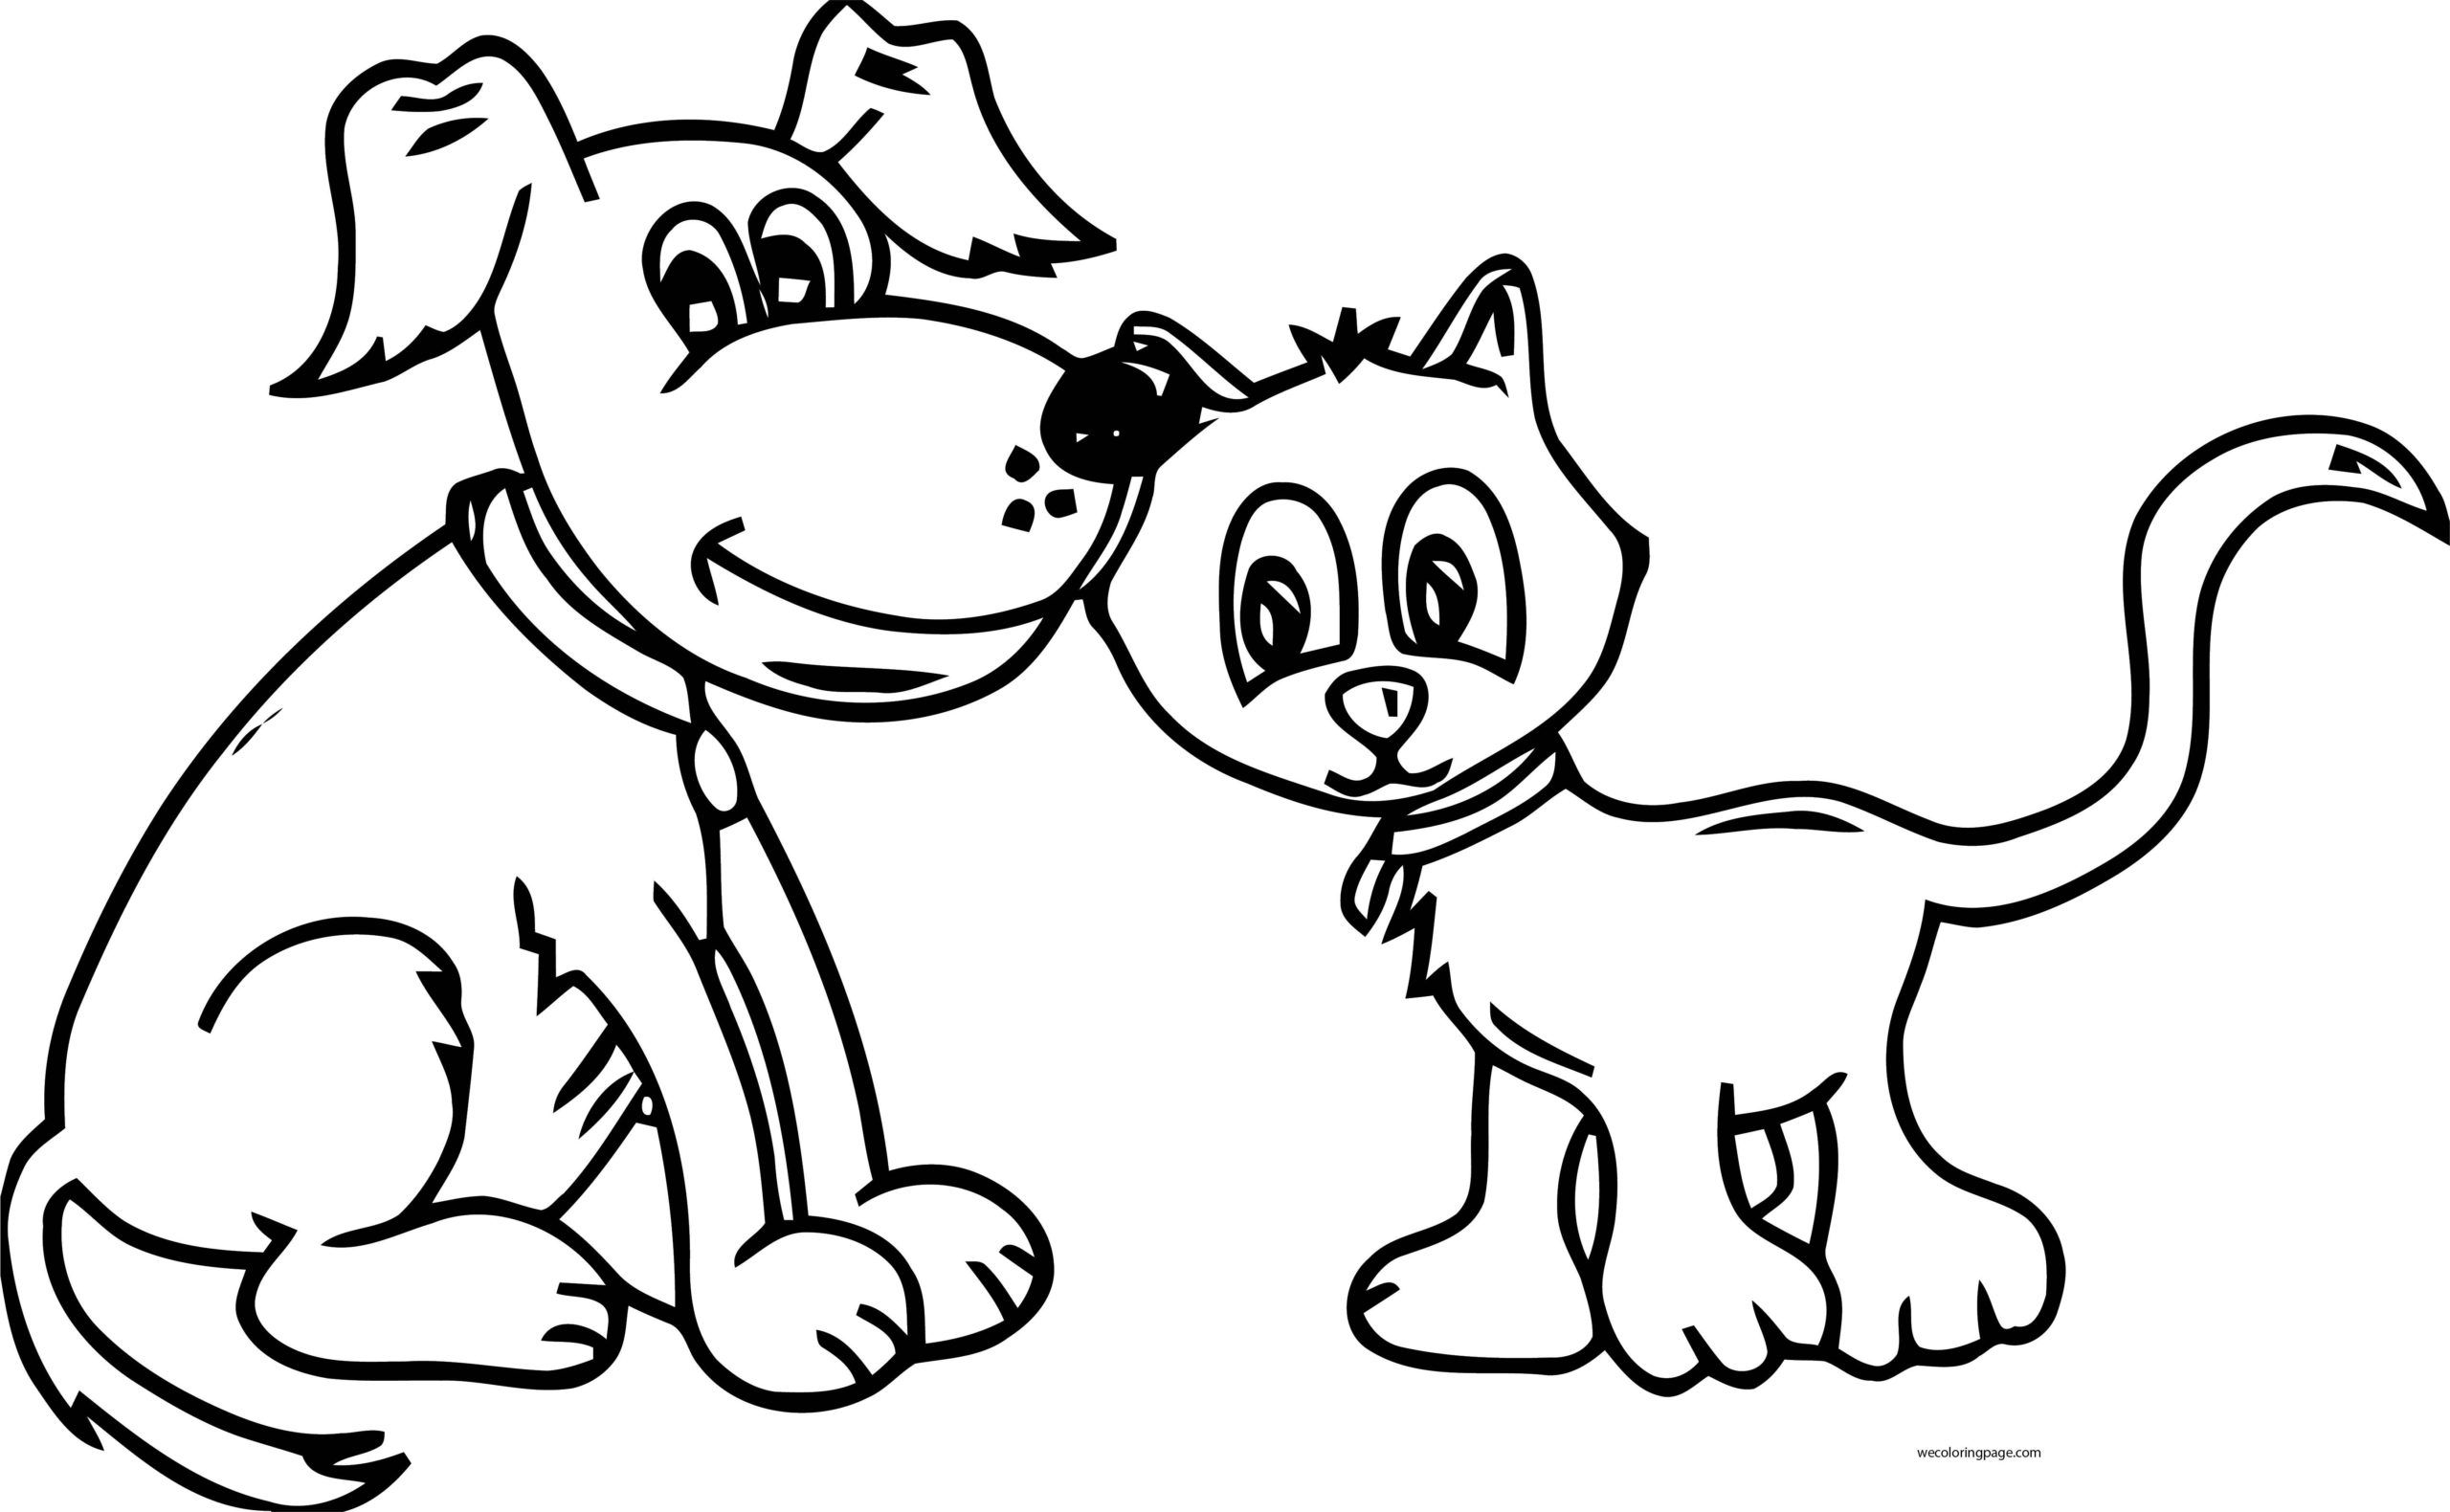 Great coloring book kittens dogs for children 3 4 years old